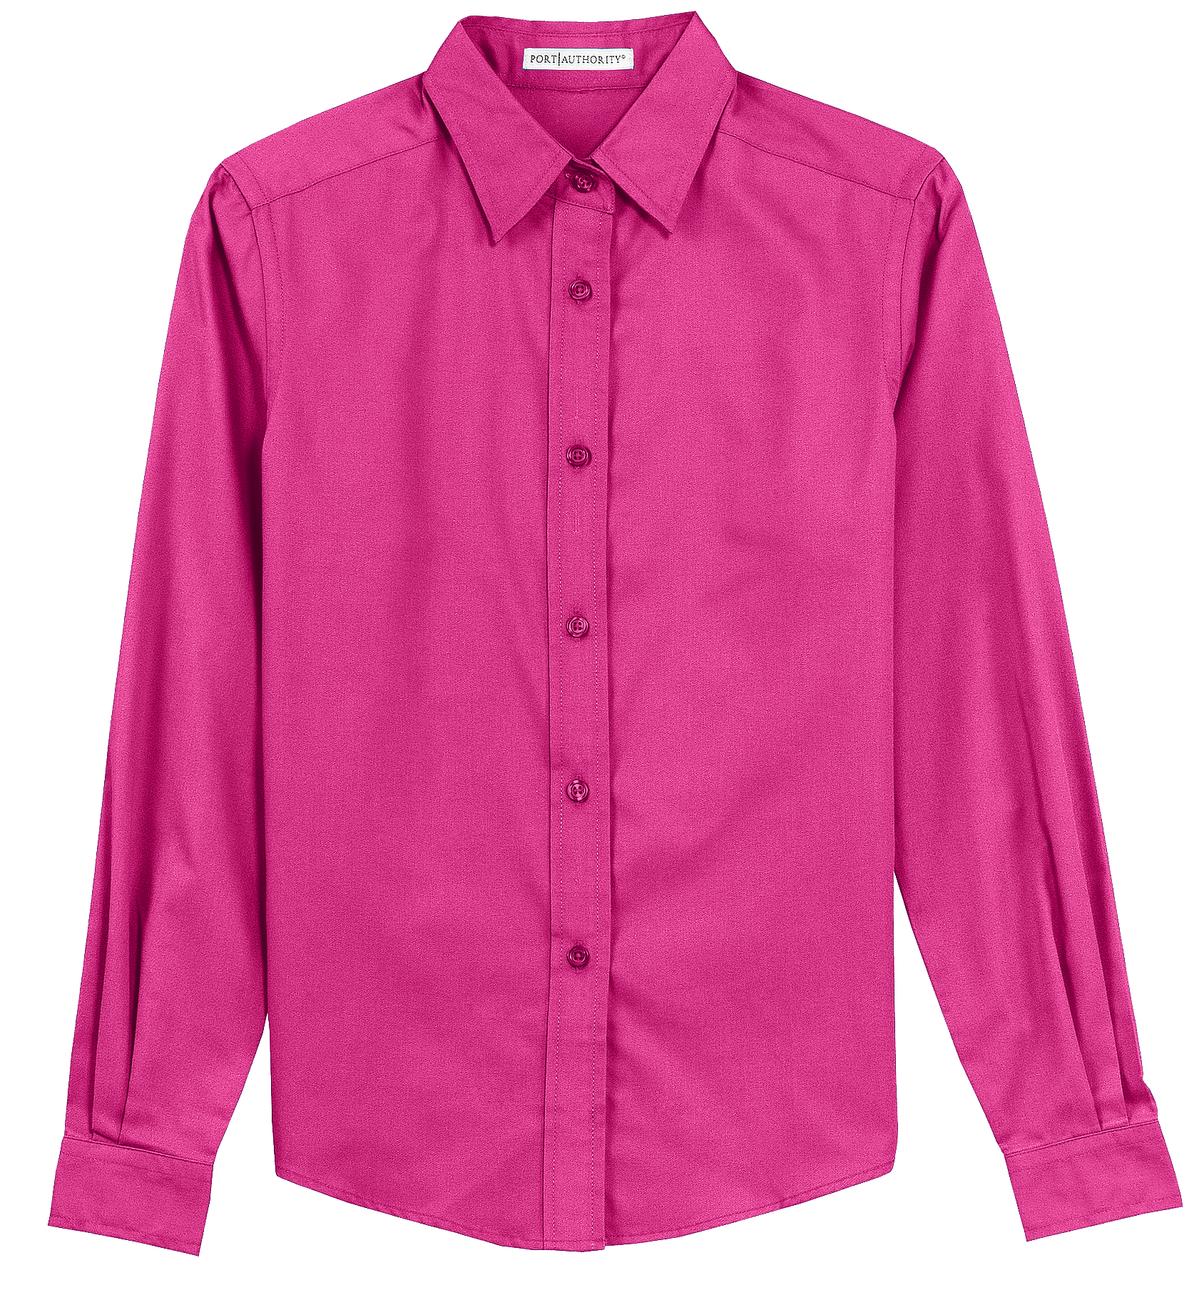 Port Authority ® Ladies Long Sleeve Easy Care Shirt. L608 - image 5 of 6